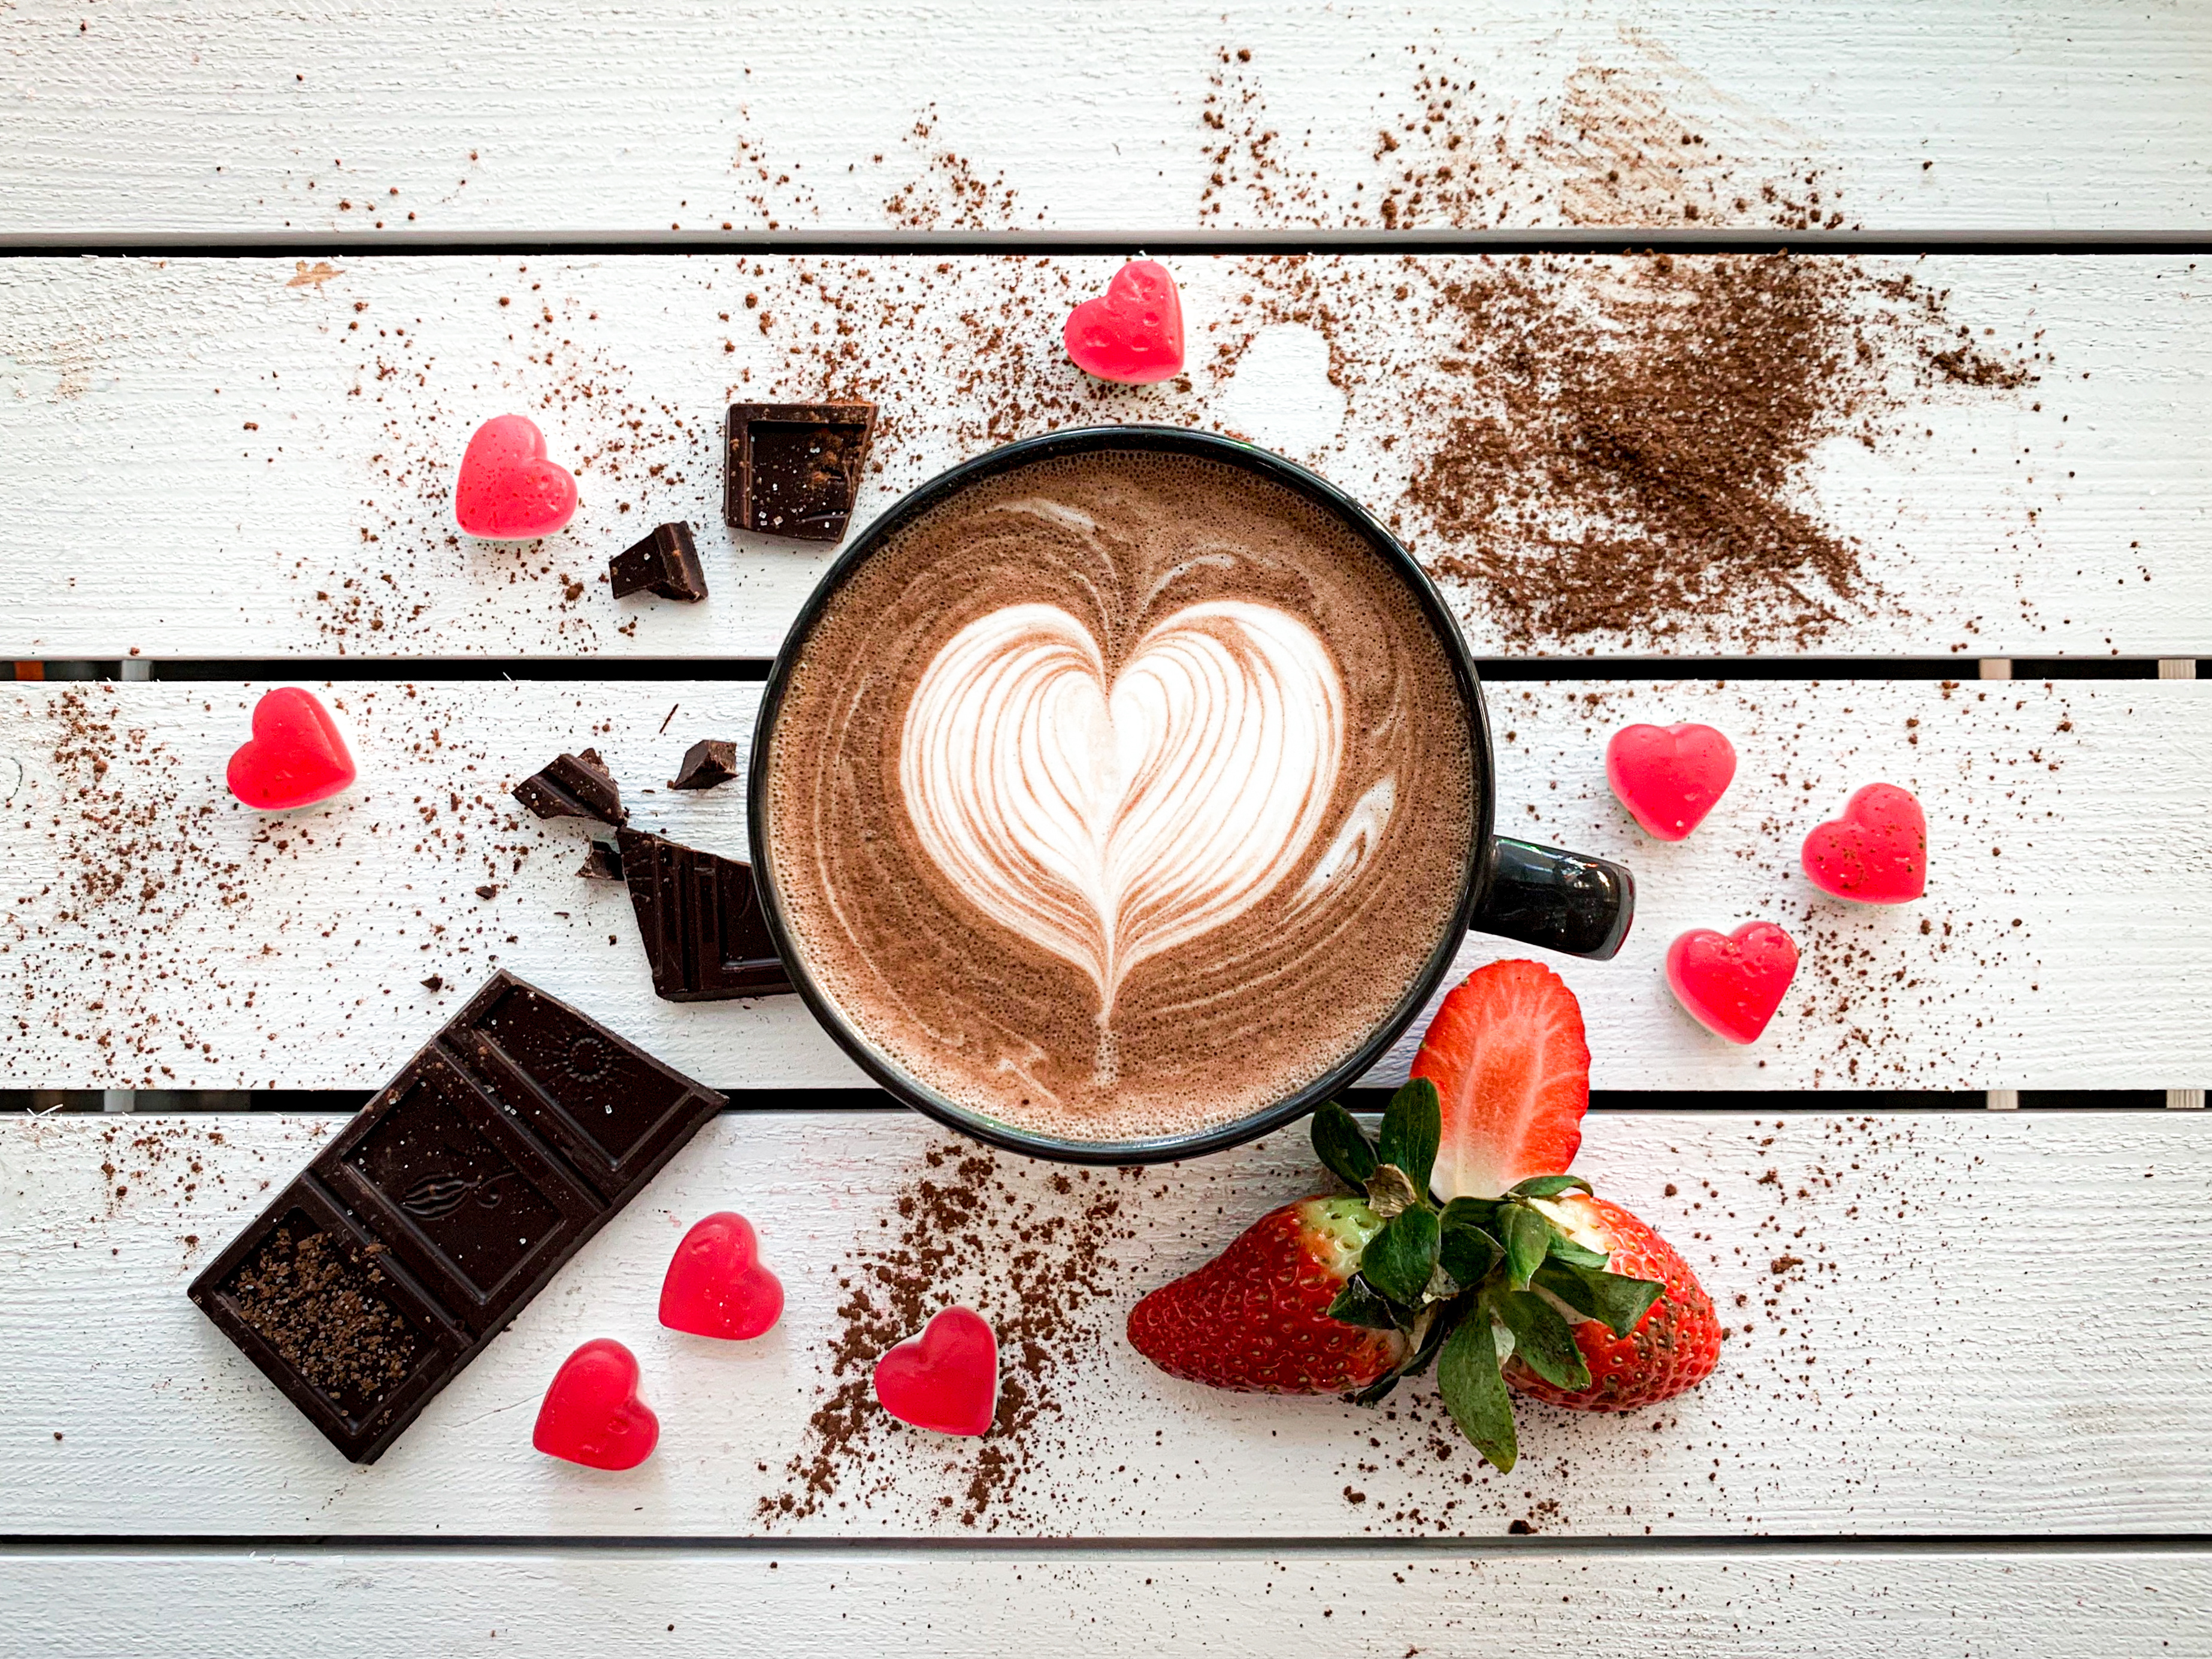 Cup Drink Still Life Chocolate Heart Shaped 3693x2769